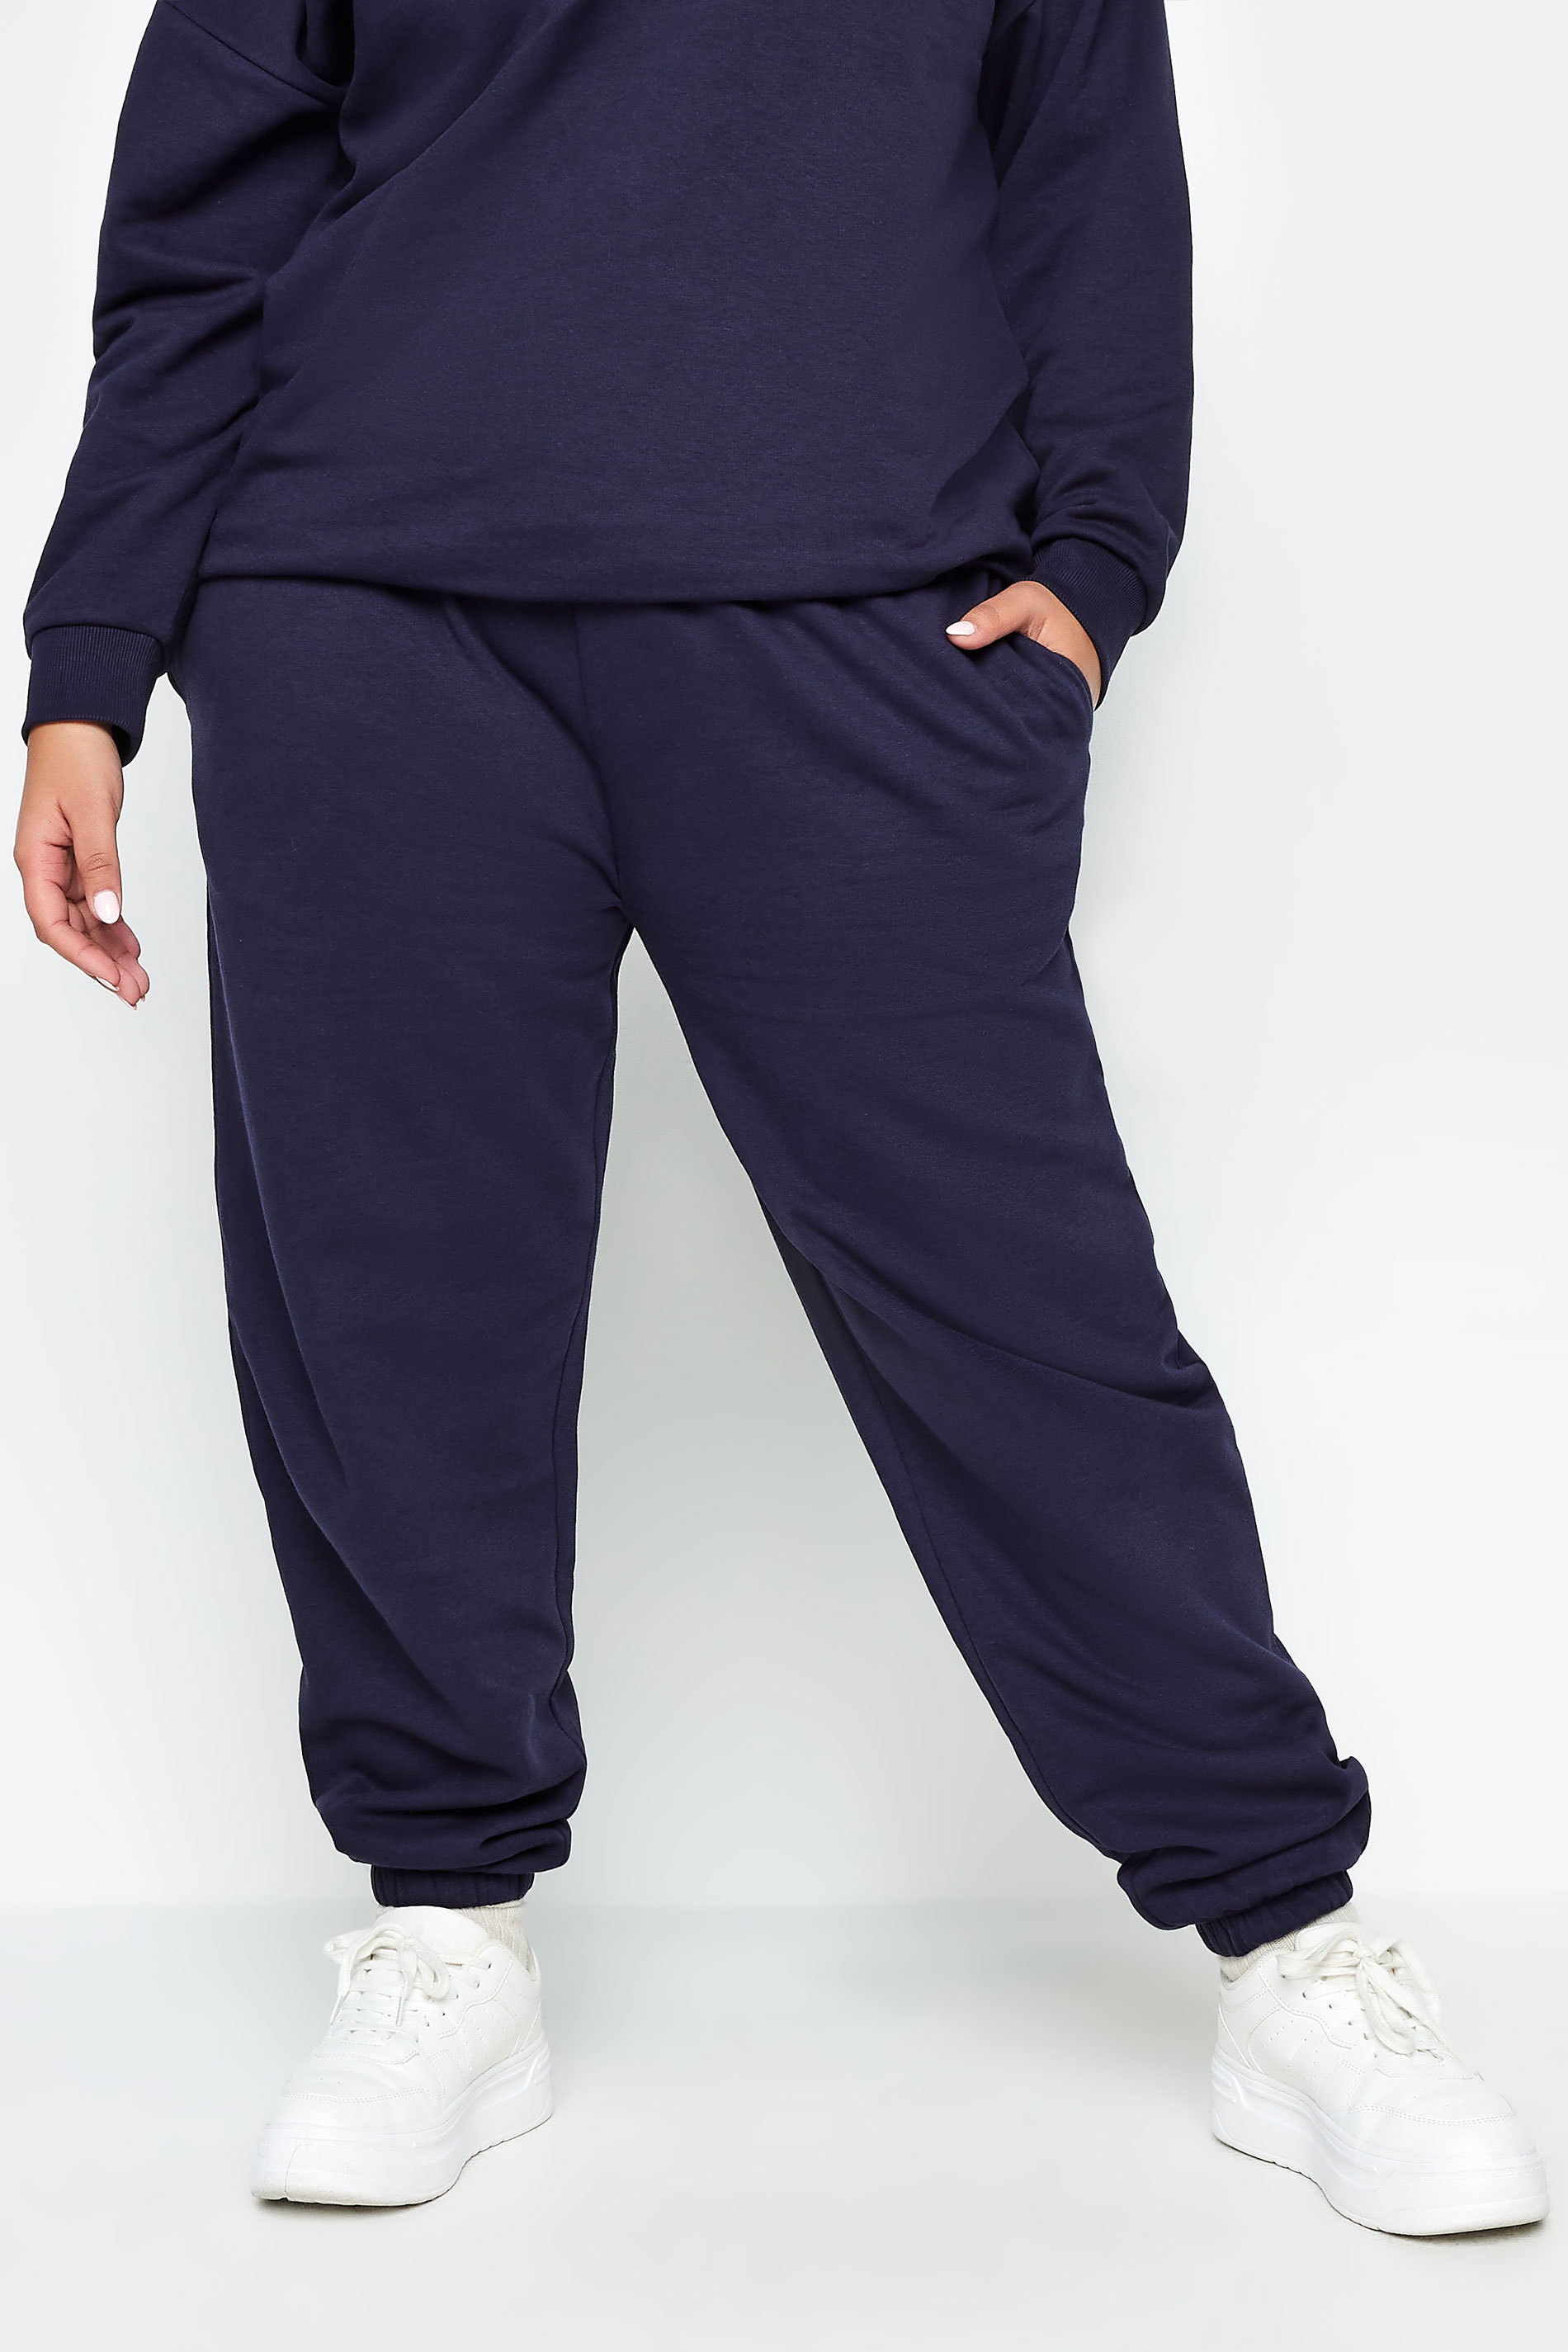 YOURS Plus Size Navy Blue Cuffed Joggers | Yours Clothing 1